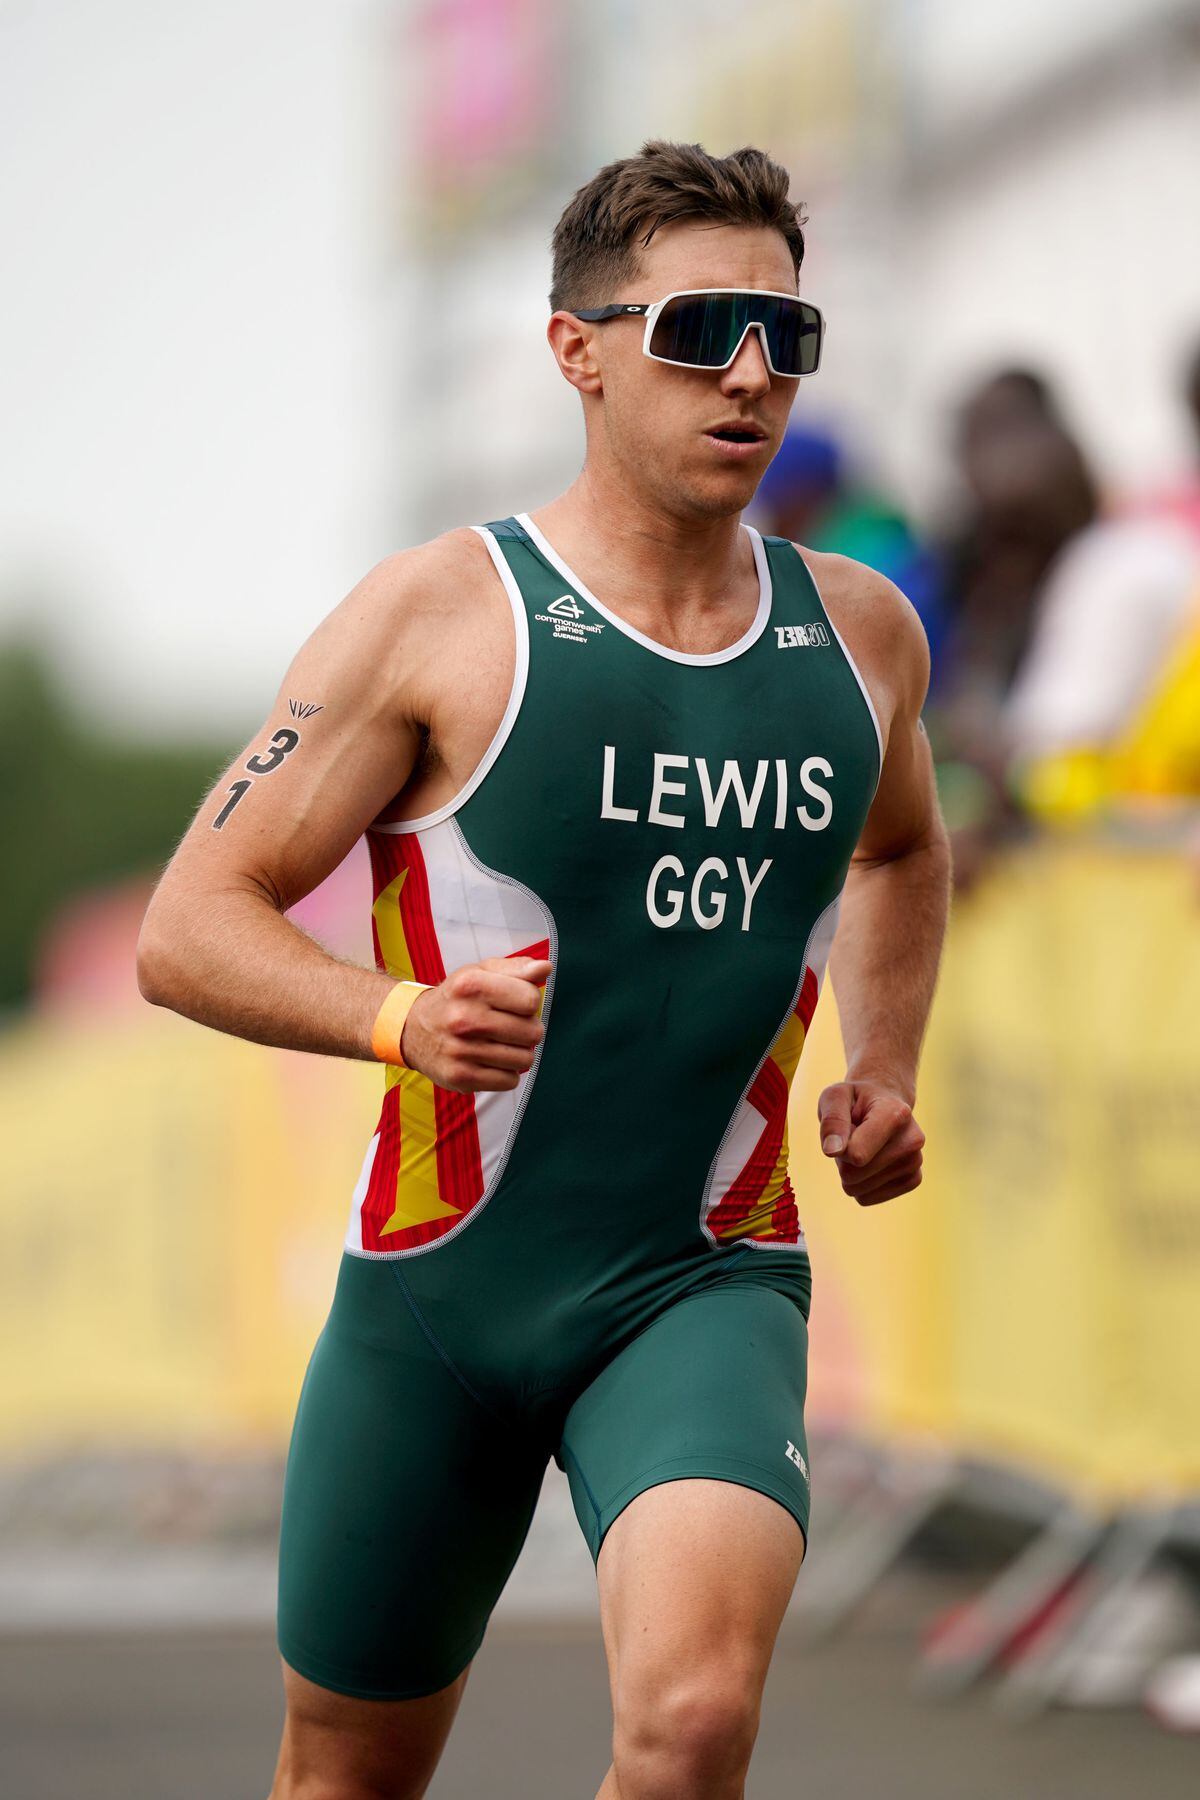 Guernsey's Josh Lewis said the setting for the triathlon was an amazing one. Photo: David Davies/PA Wire